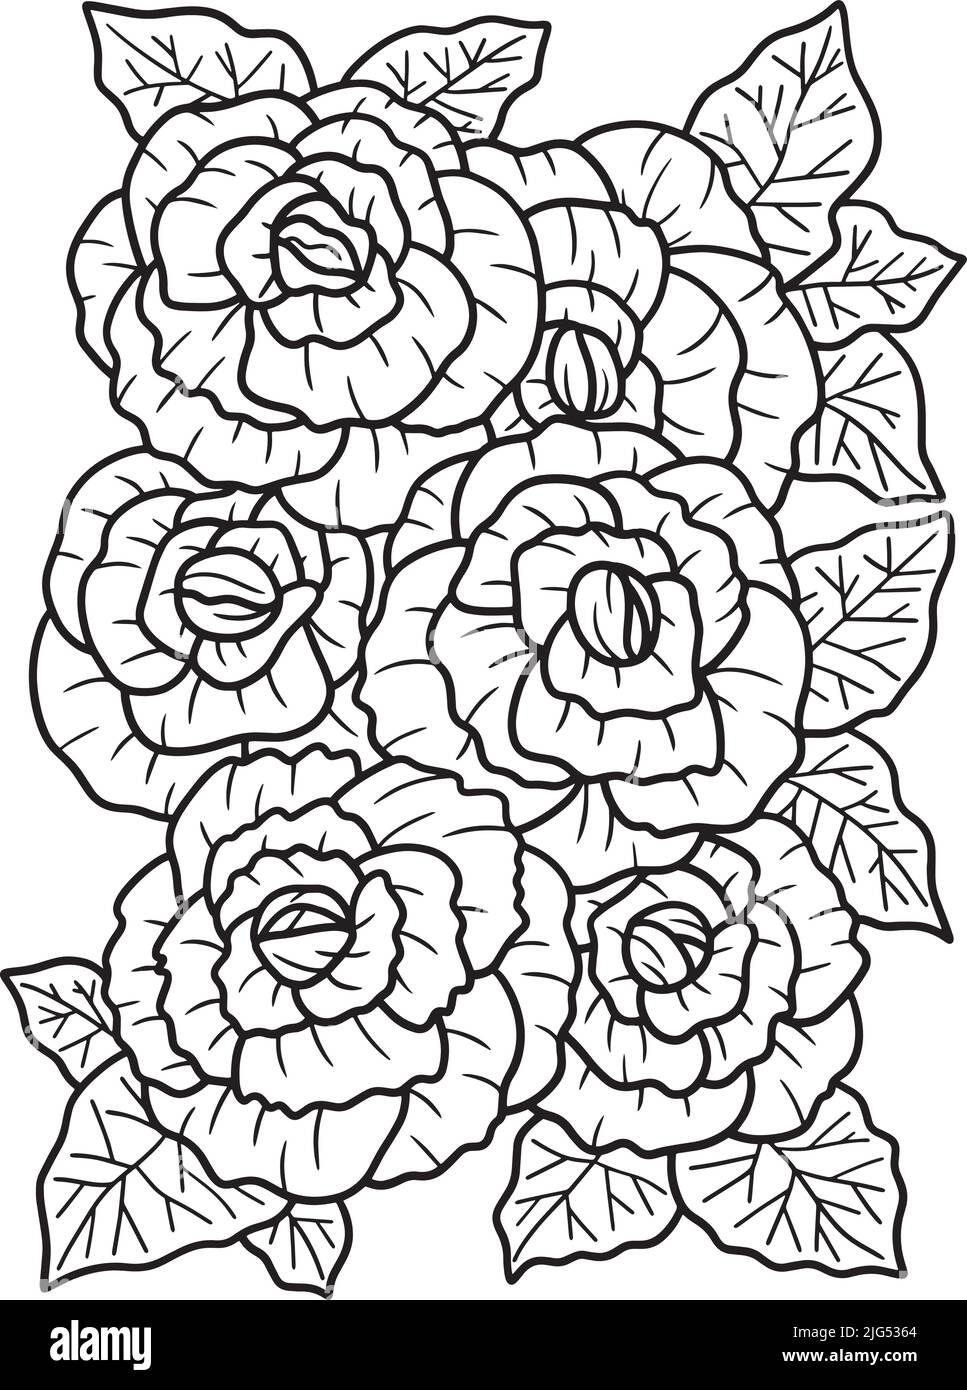 Begonia Flower Coloring Page for Adults Stock Vector